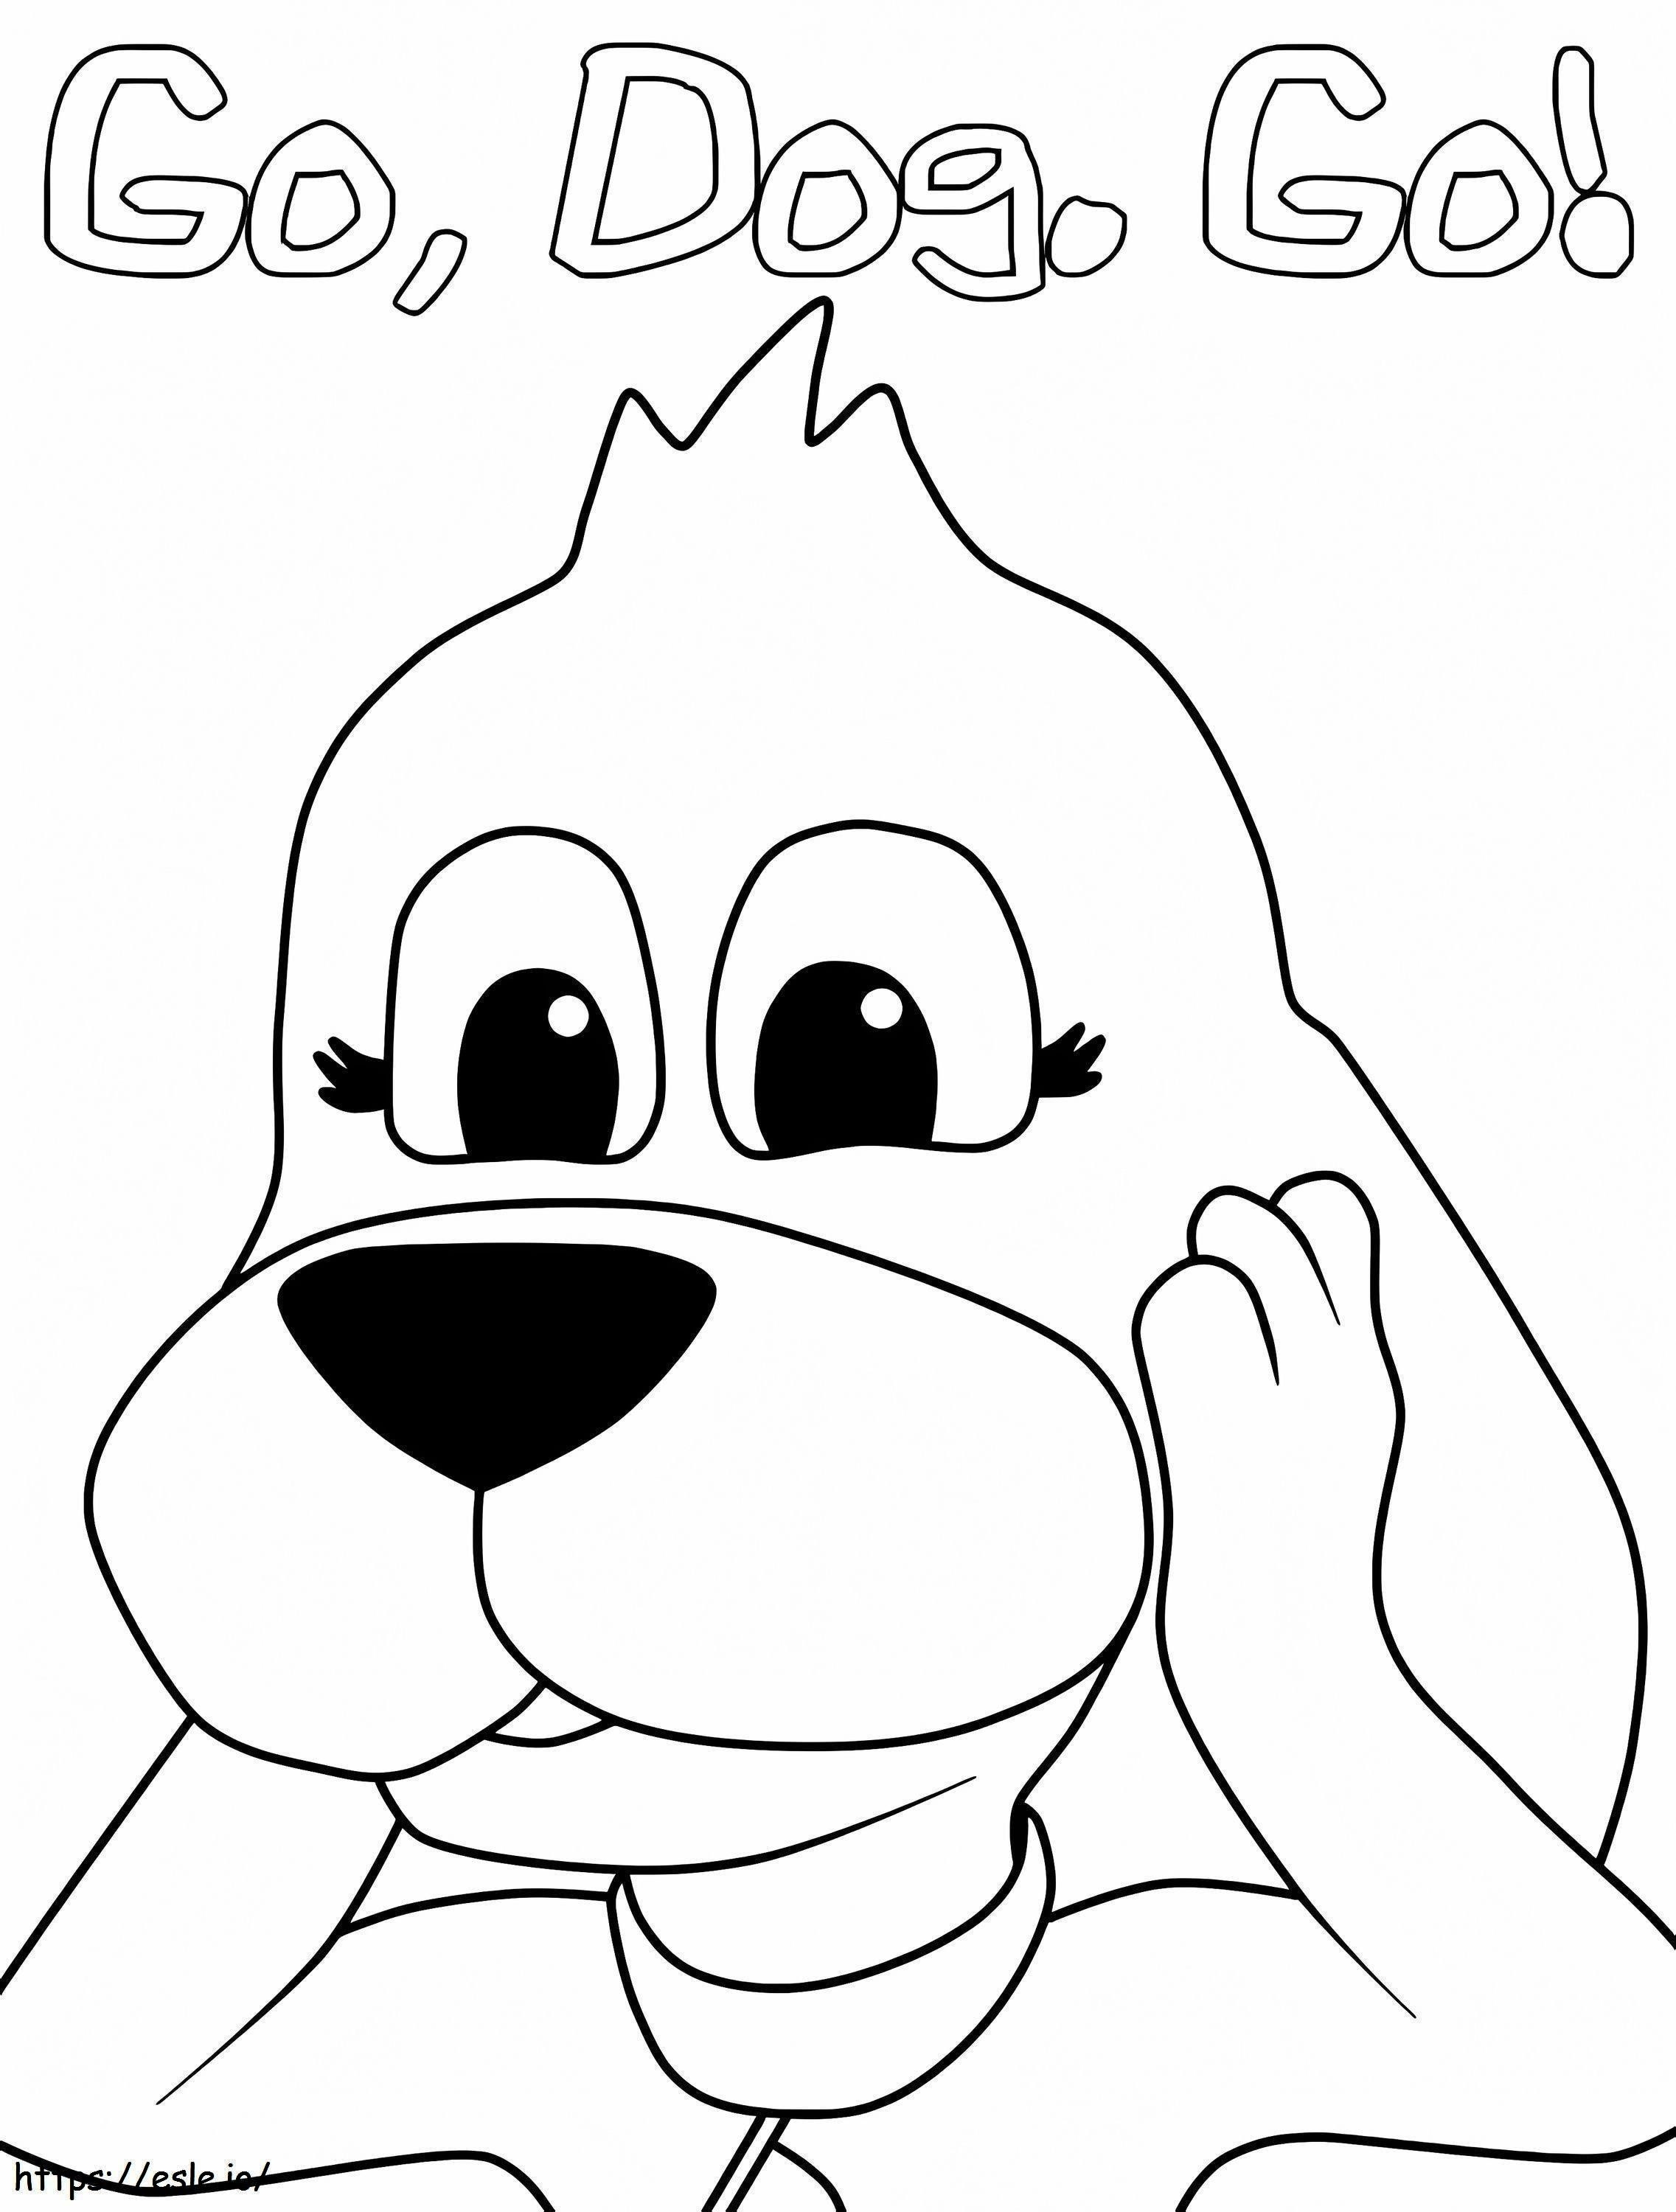 Tag Barker Go Dog Go coloring page